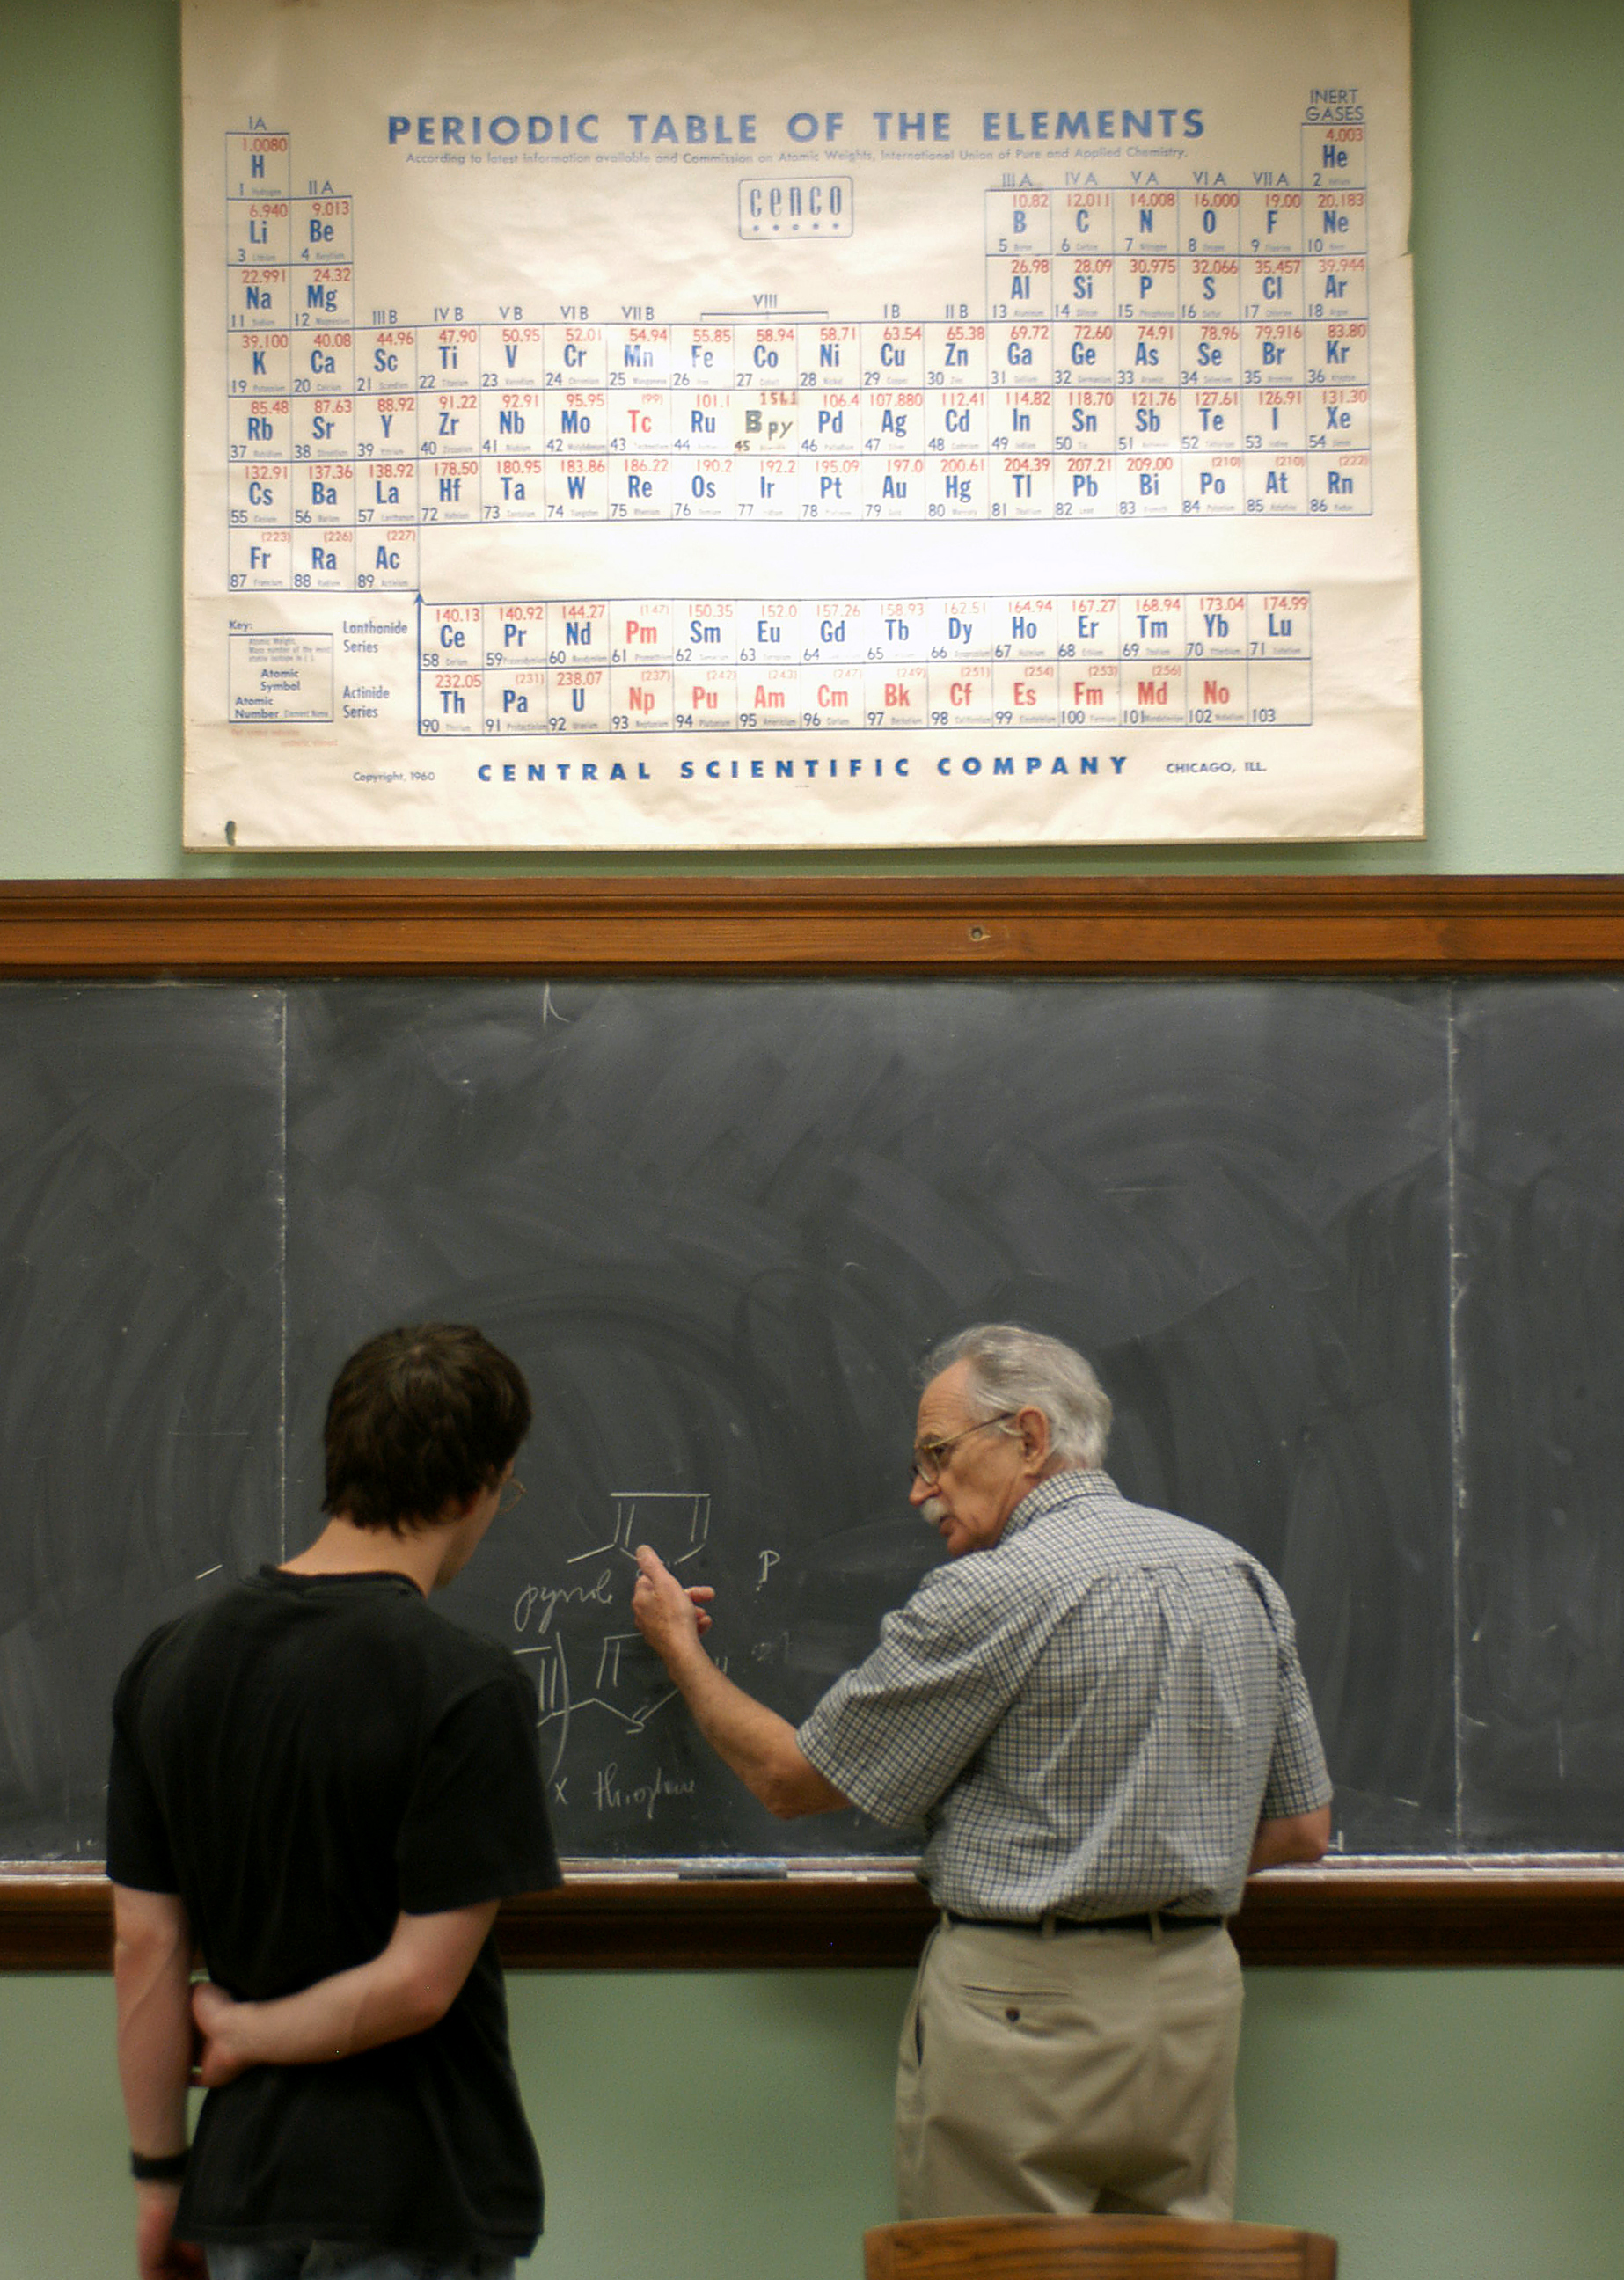 A professor and student stand at a chalkboard working on a chemistry problem